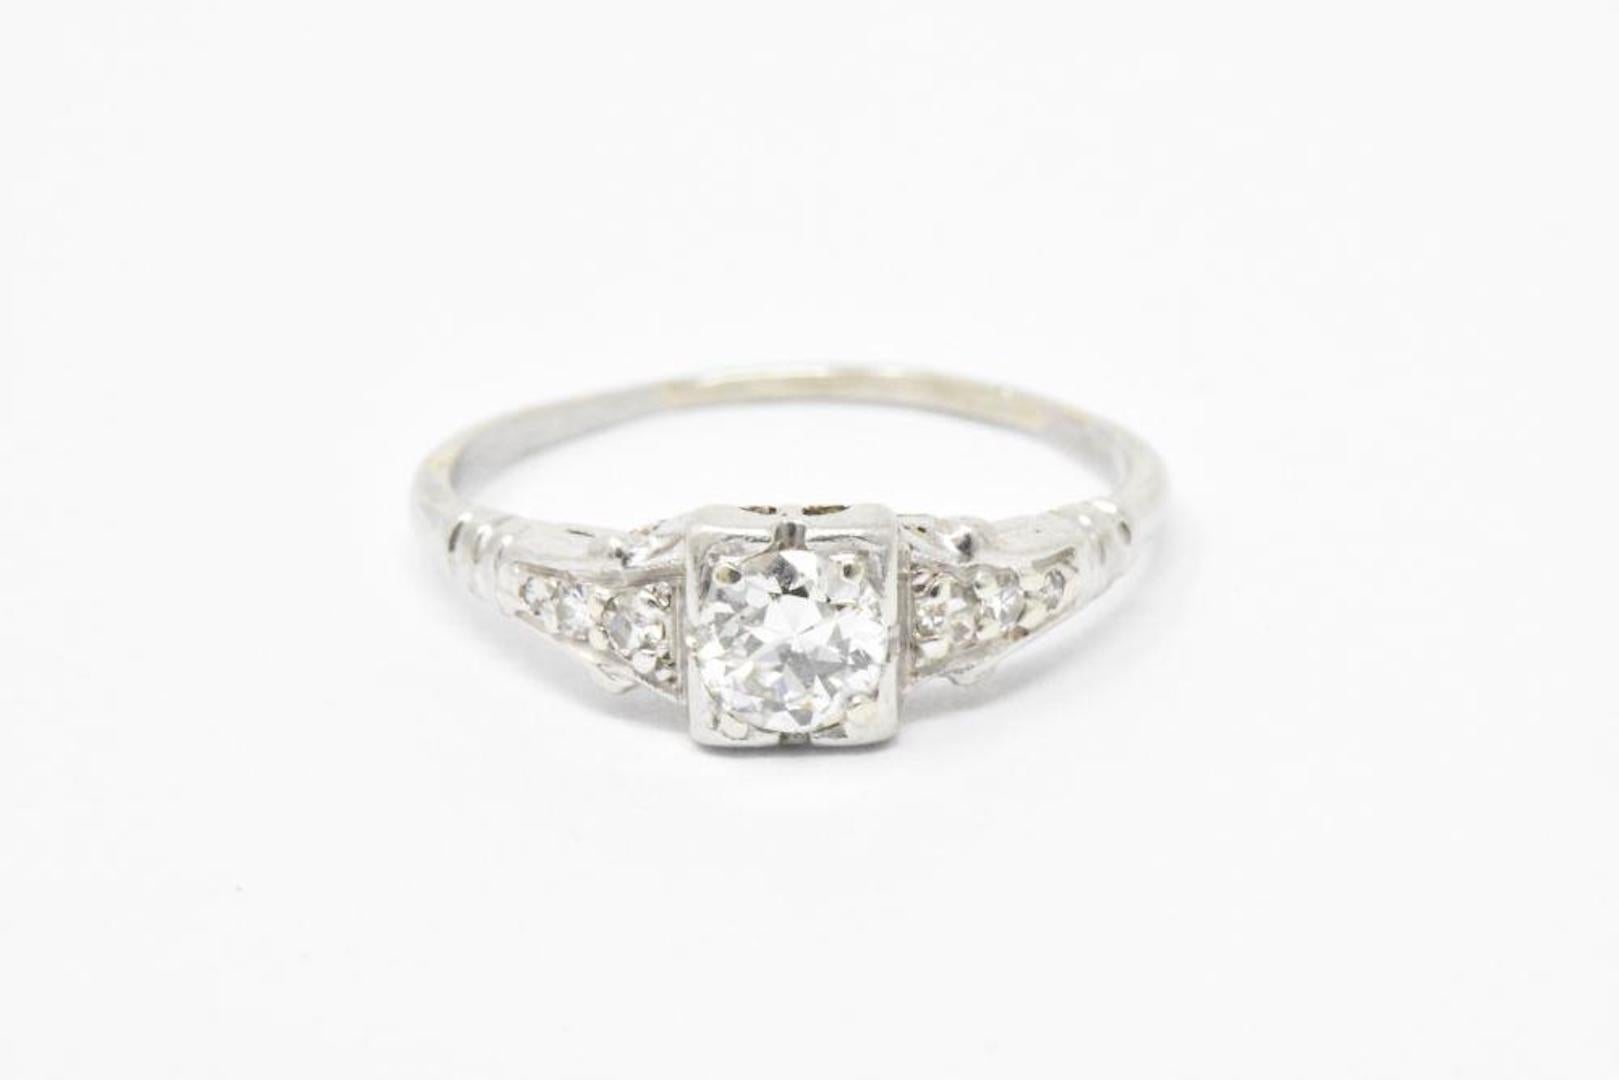 Stunning and bold platinum engagement ring. The center old European cut diamond weighs approximately 0.38 carats, G color and VS clarity. The mounting is decorated in a bold Art Deco style design and is accented by six single cut diamonds weighing